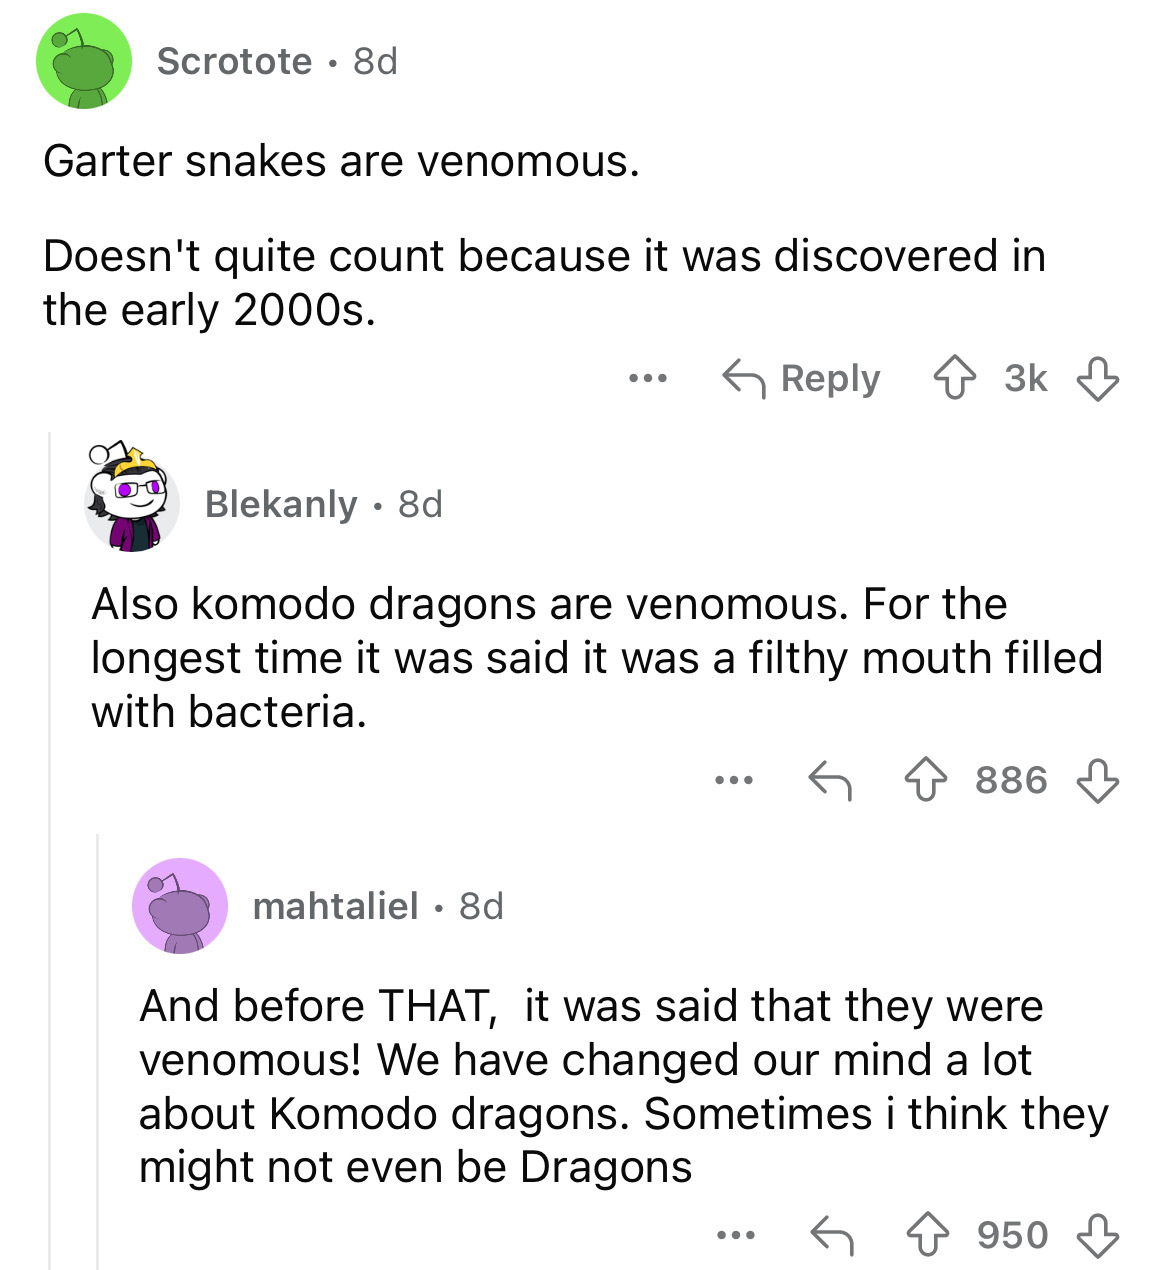 screenshot - Scrotote 8d Garter snakes are venomous. Doesn't quite count because it was discovered in the early 2000s. Blekanly 8d ... 3k 3k Also komodo dragons are venomous. For the longest time it was said it was a filthy mouth filled with bacteria. ...